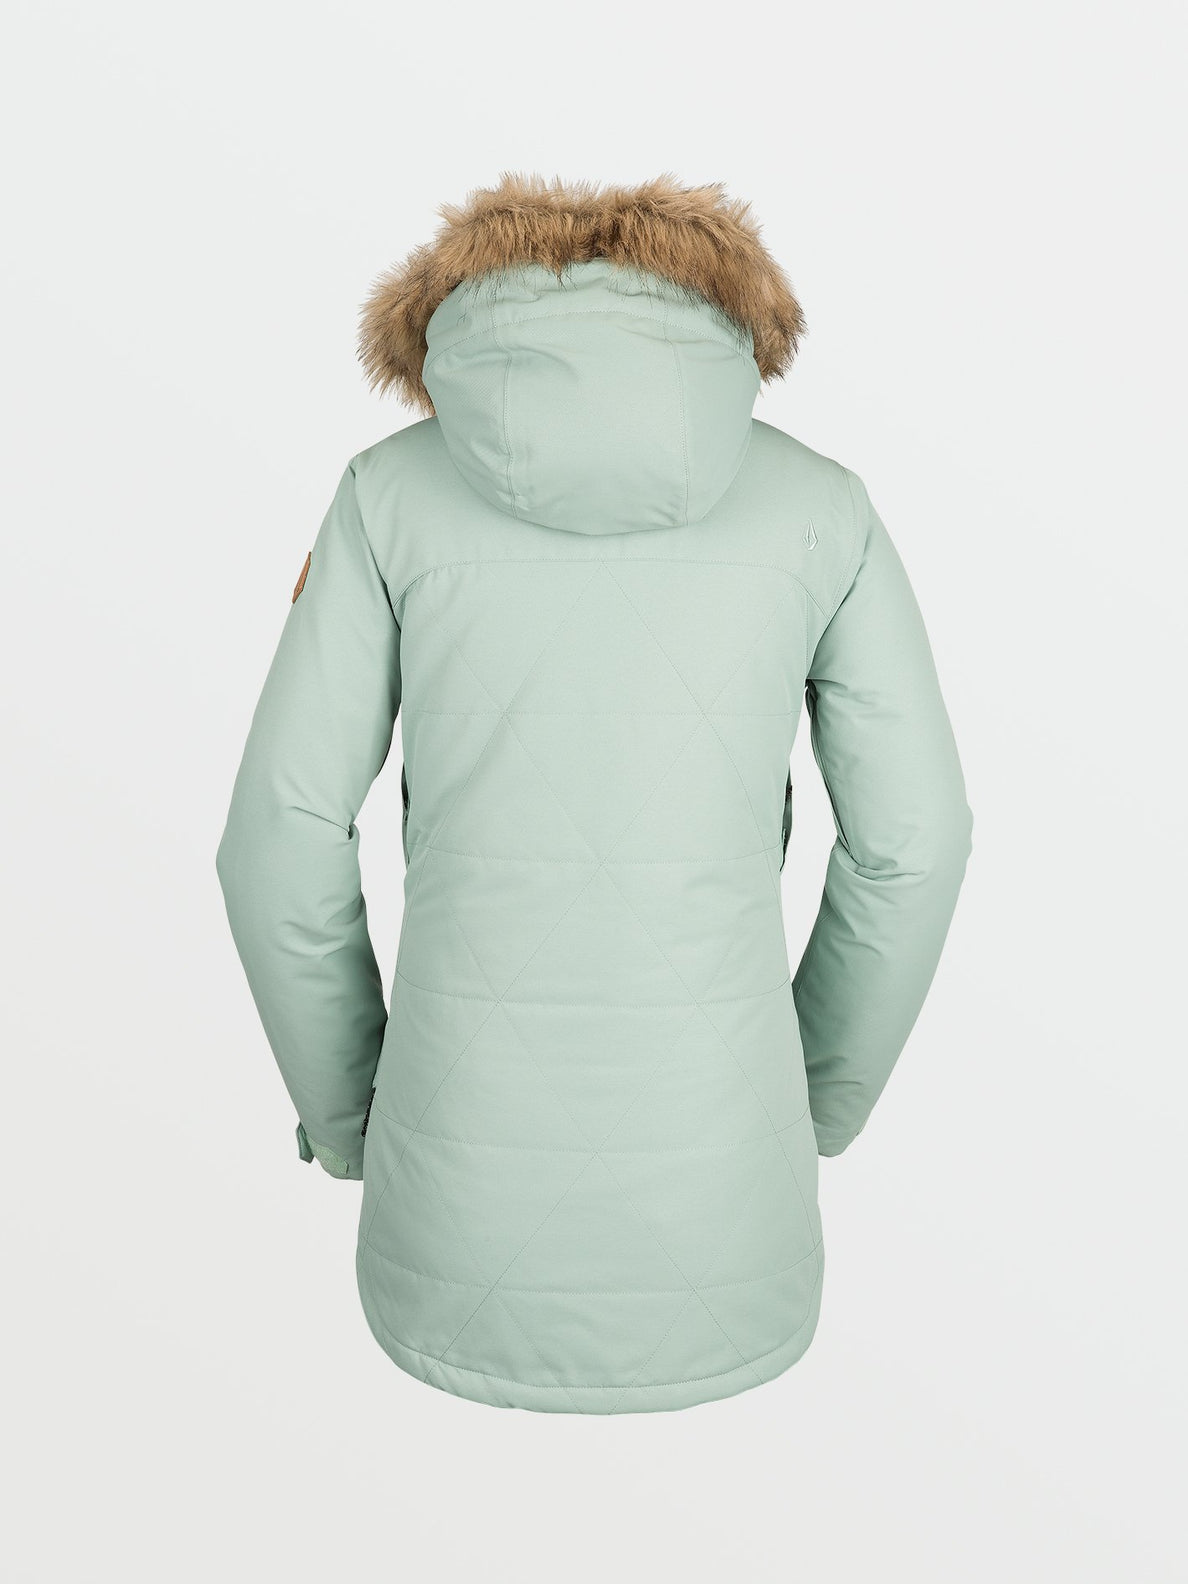 Fawn Insulated Jacket - MINT (H0452011_MNT) [B]